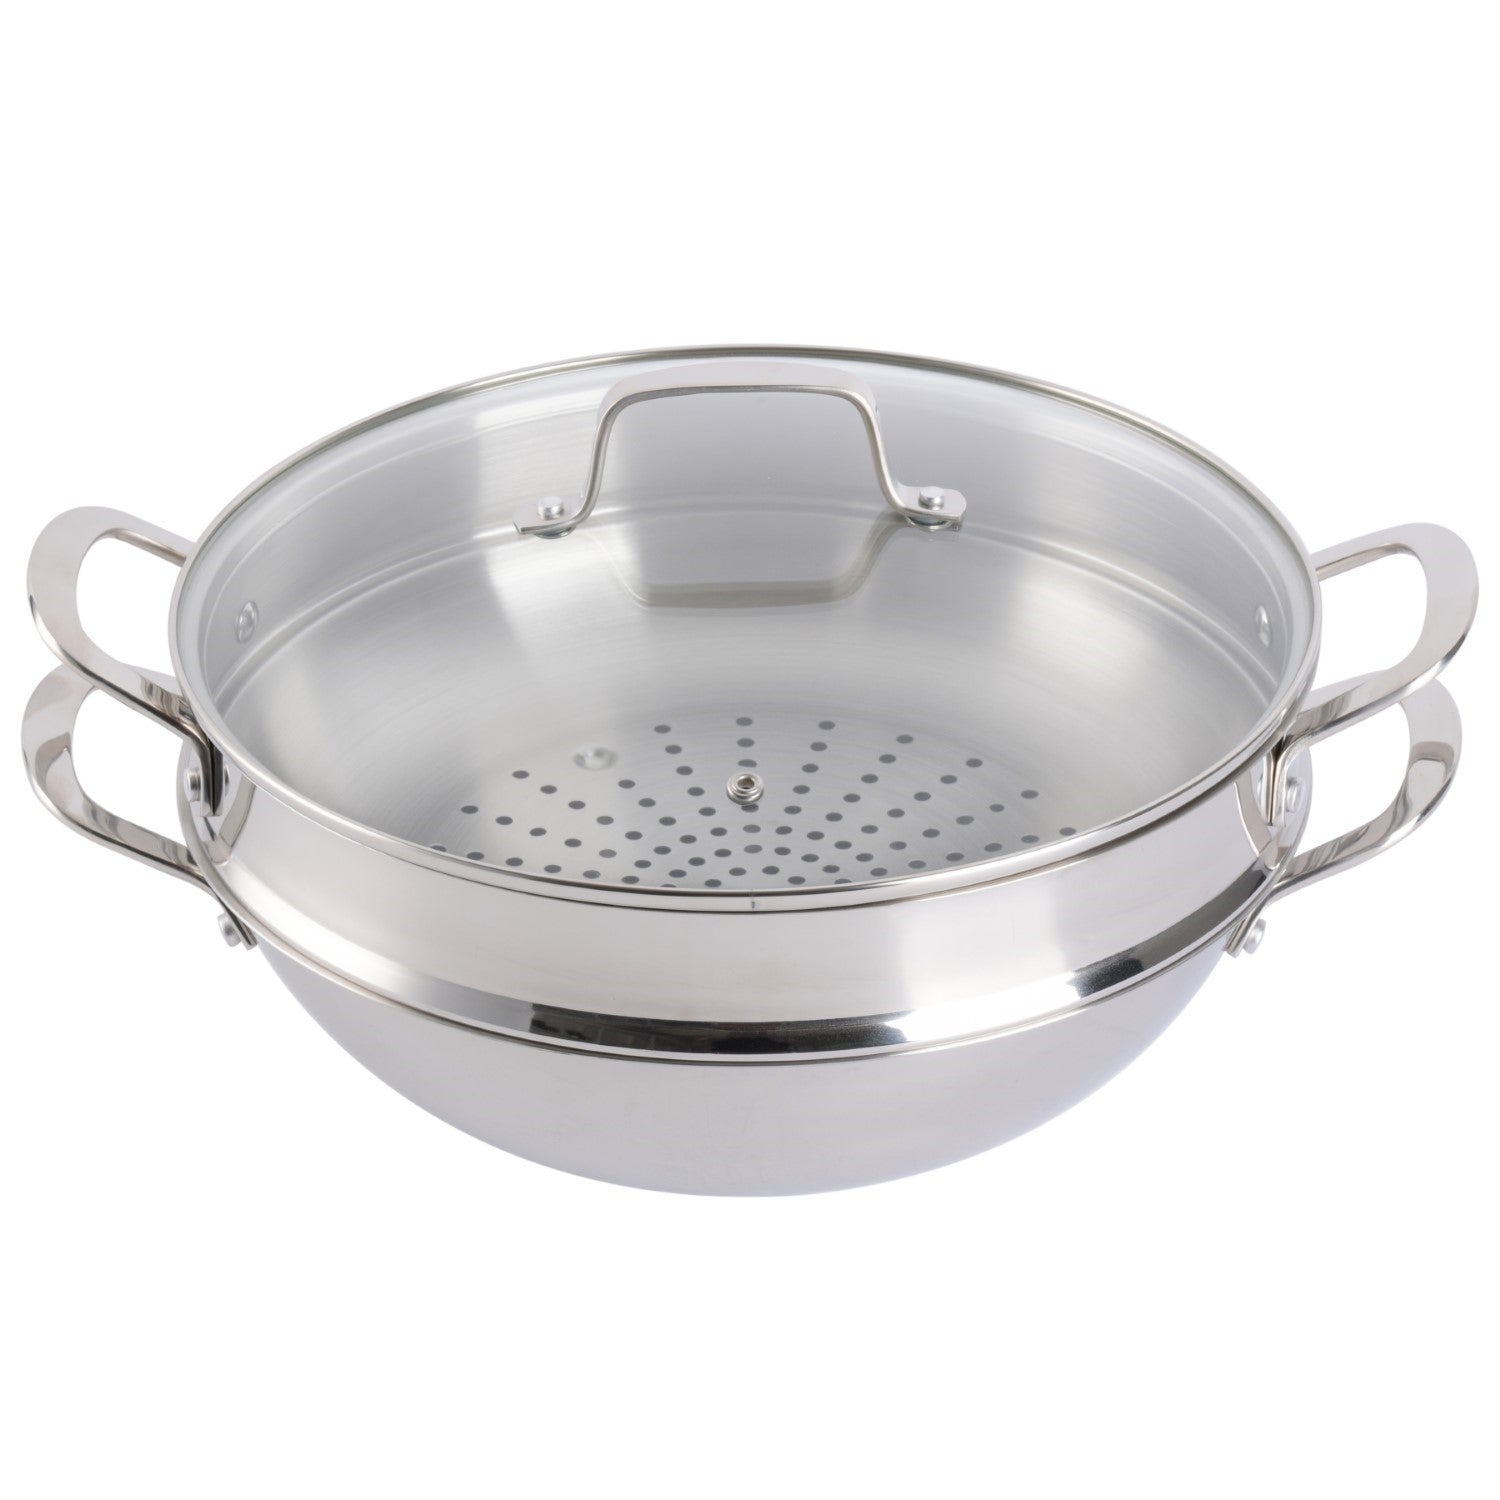 Martha Stewart Essential Pan, with Lid, Stainless Steel, 12 Inch